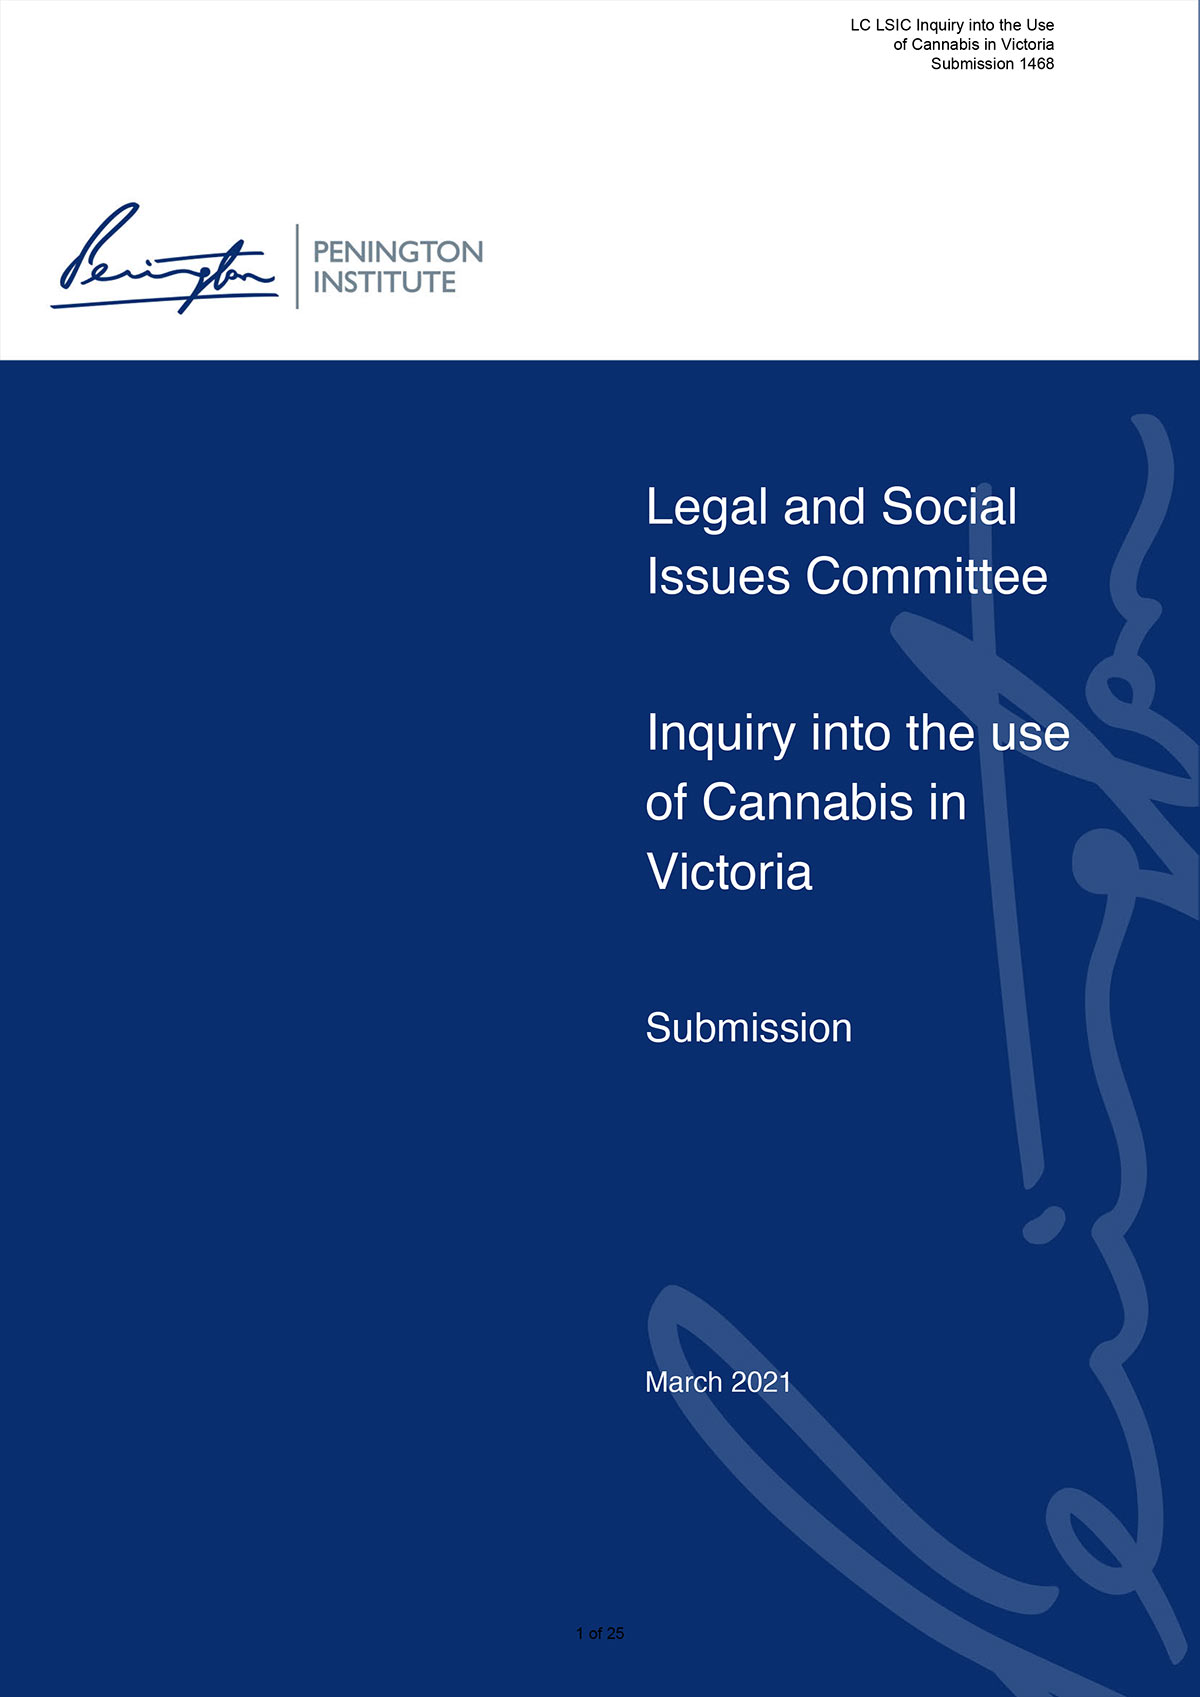 Submission to Parliamentary Inquiry into the use of cannabis in Victoria (2021)